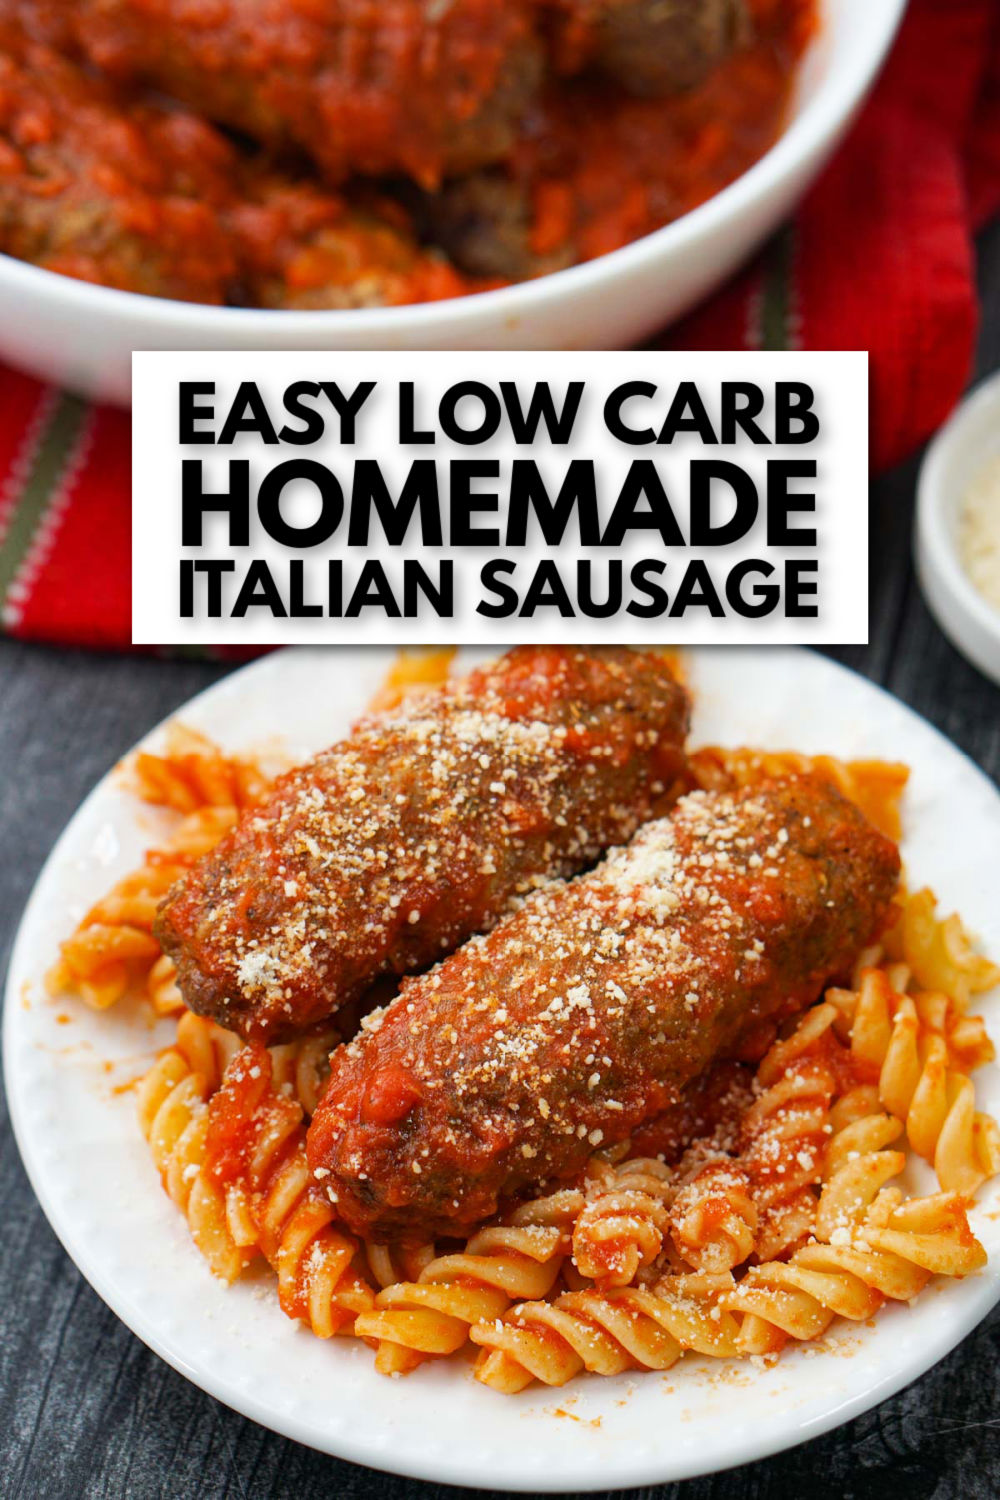 bowl and plate with homemade Italian sausage with sauce with text